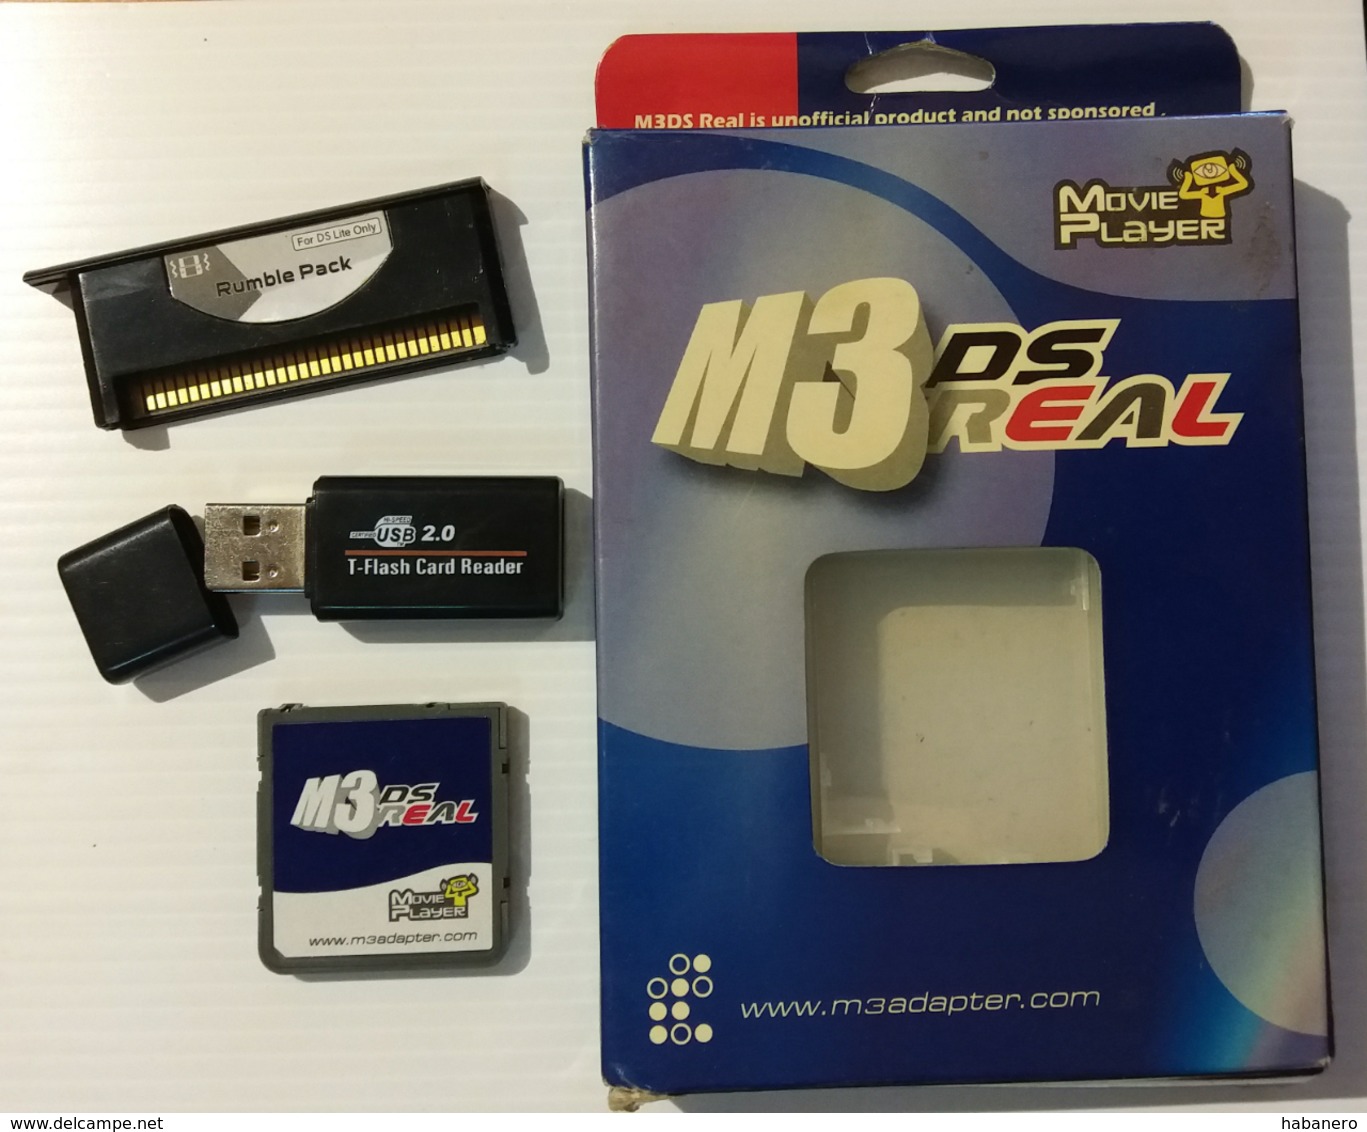 COLLECTORS ITEM - M3 DS REAL WITH RUMBLE PACK FOR NDS/NDSL/NDSi/NDSi XL - NEVER USED IN RETAIL PACKING - Accessories